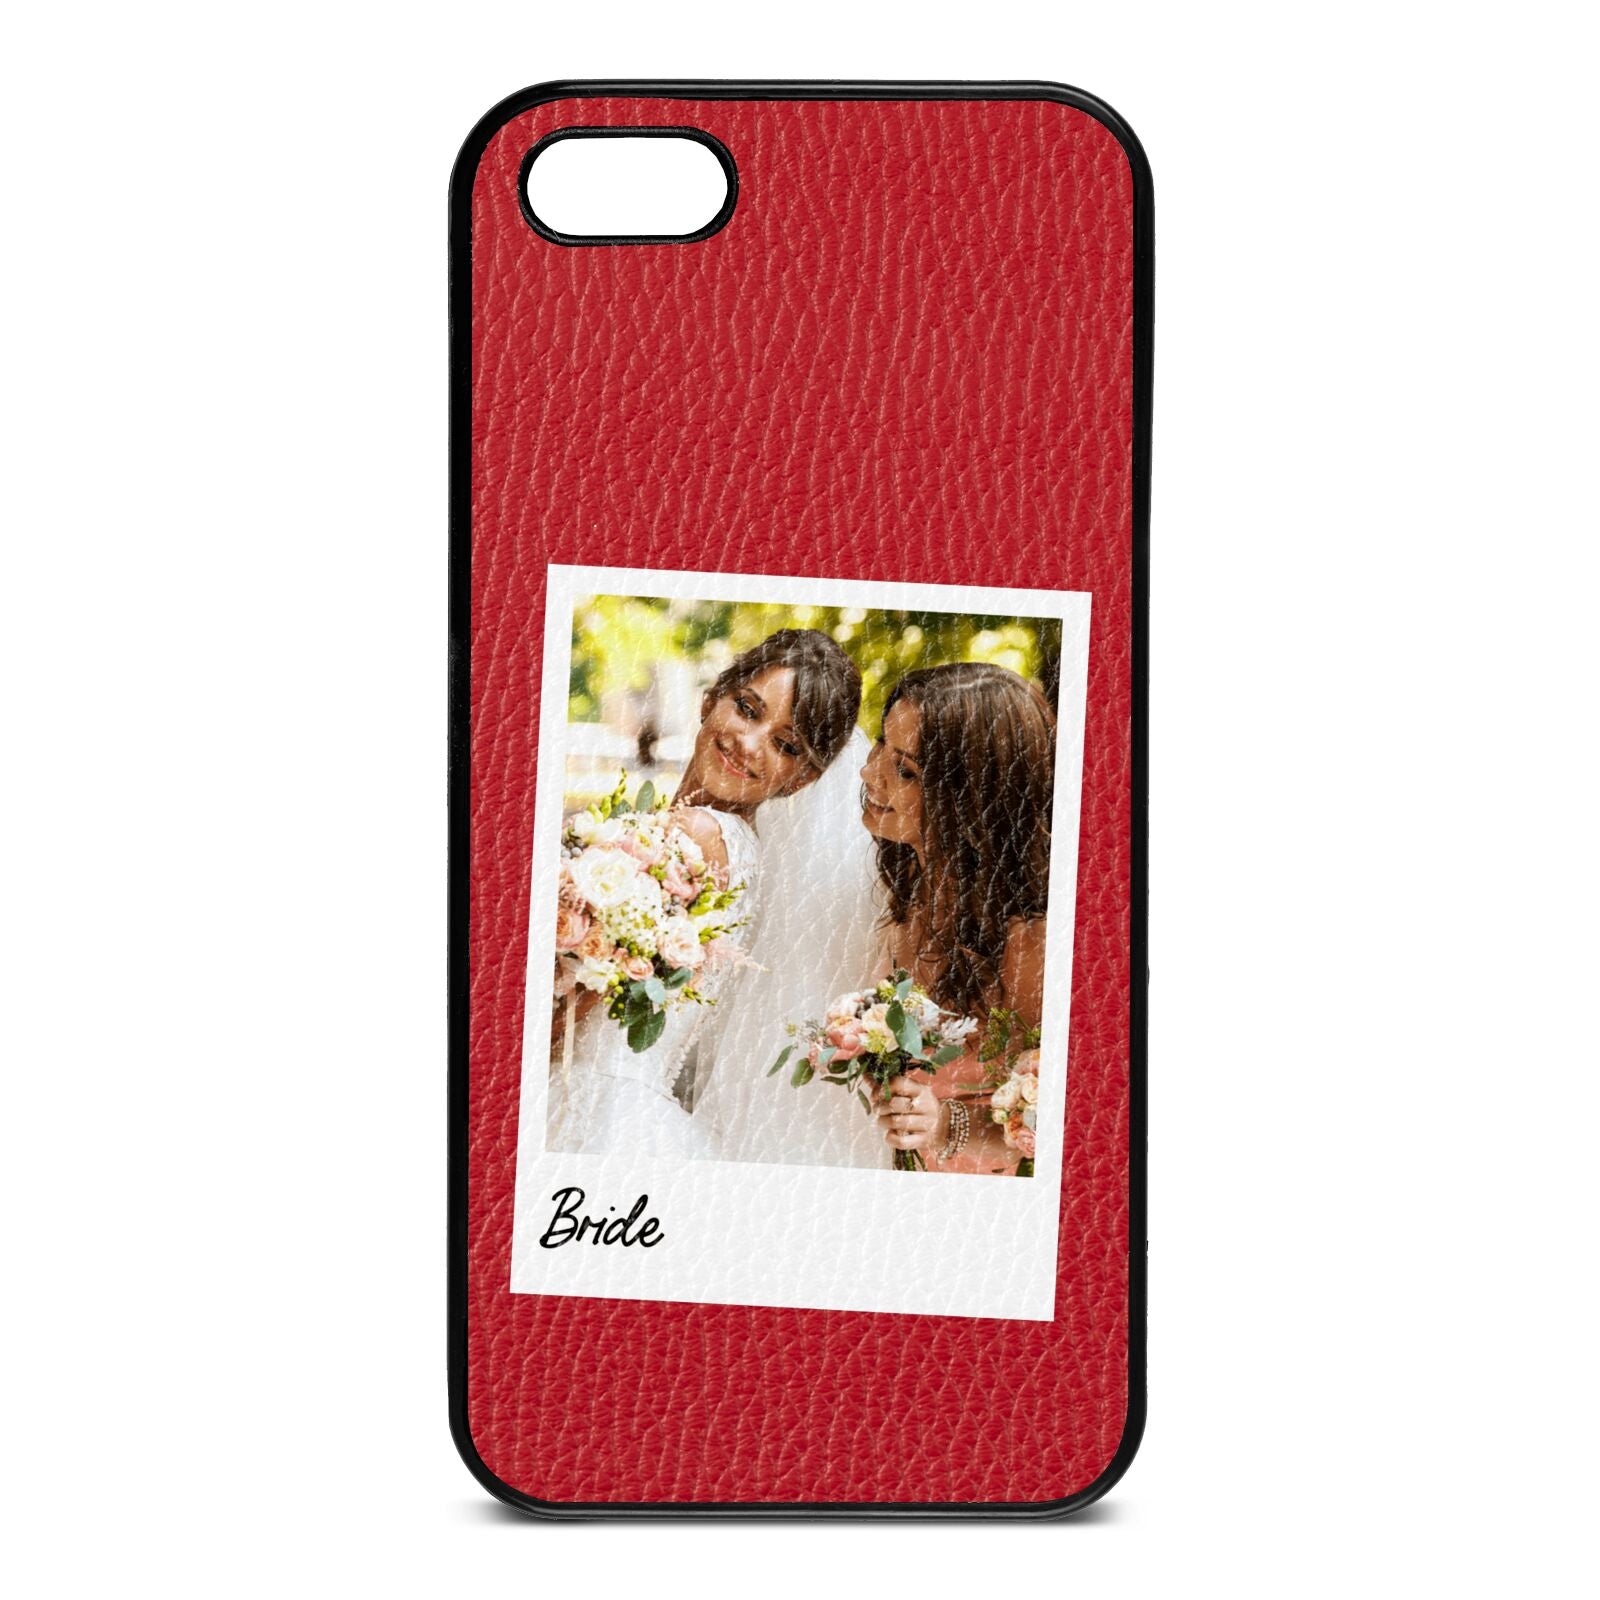 Bridal Photo Red Pebble Leather iPhone 5 Case